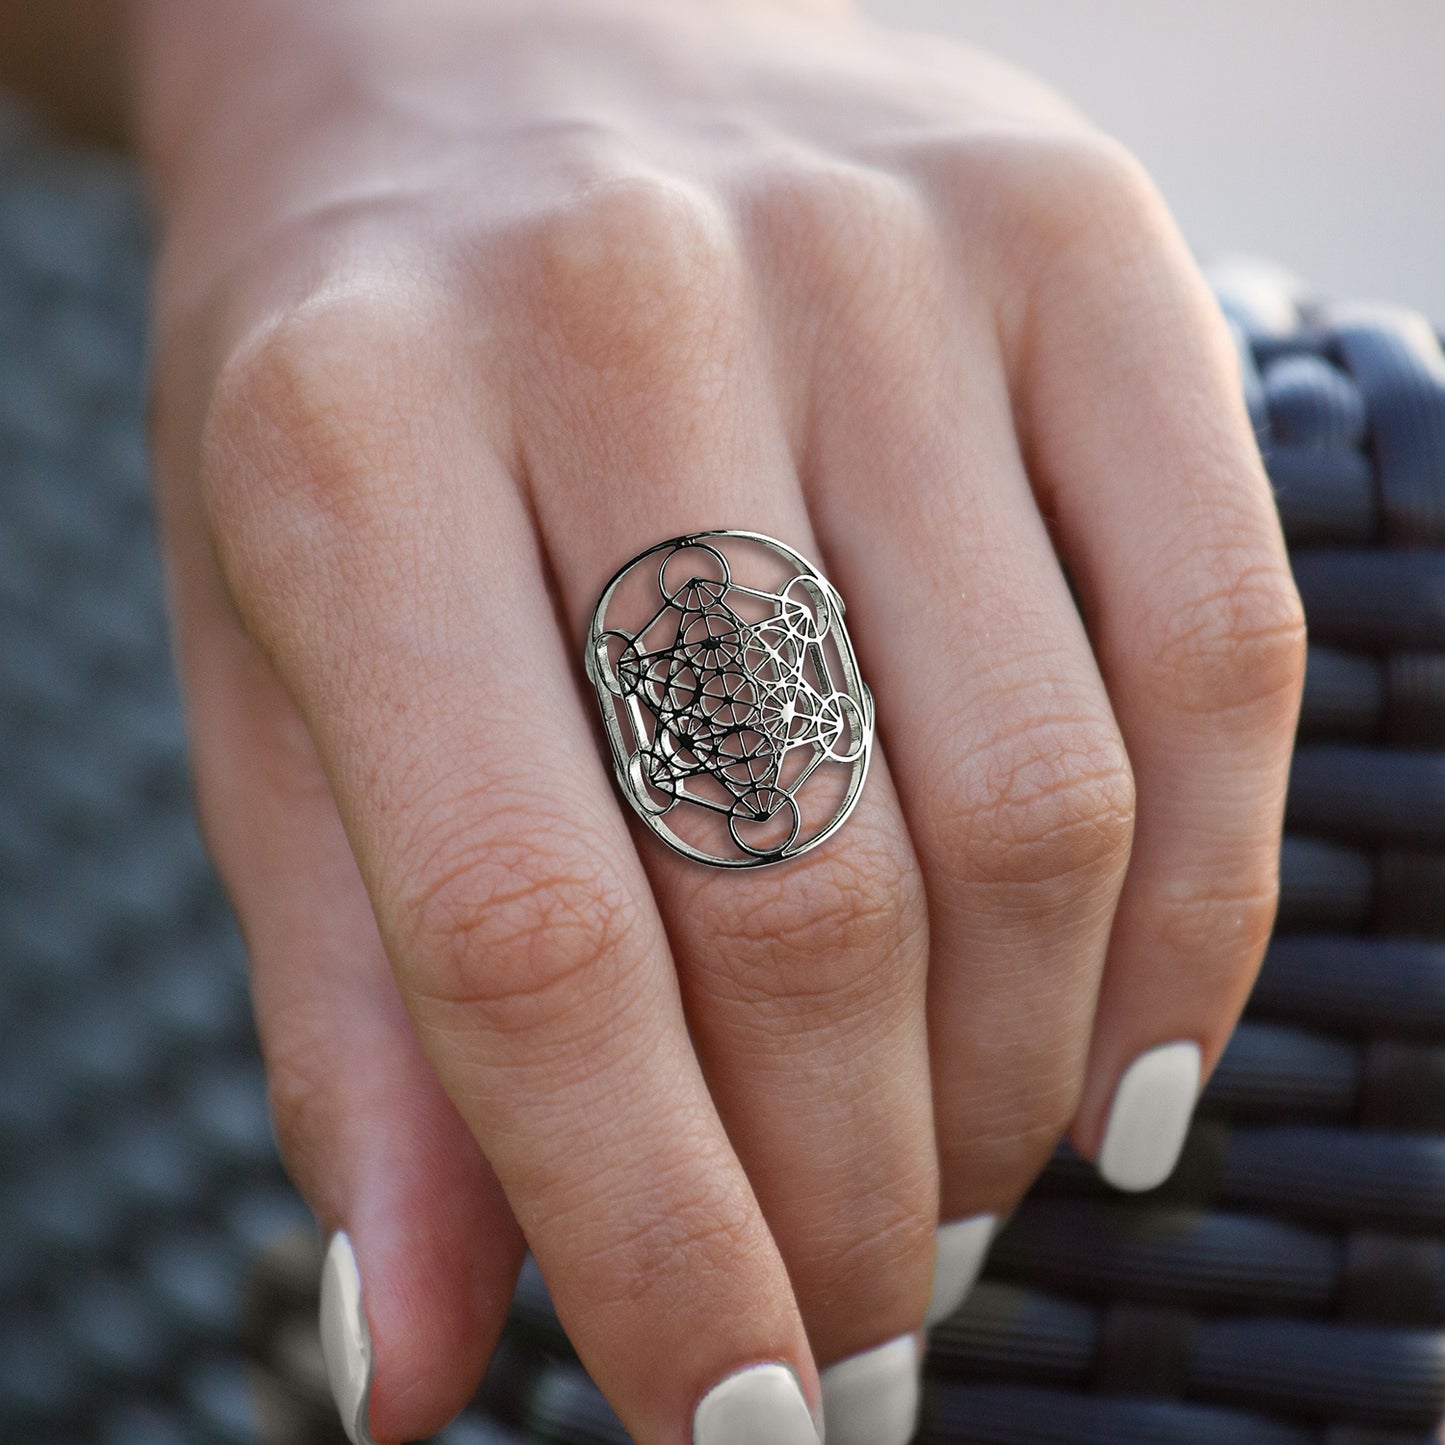 A silver ring on a model's finger. The ring depicts Metatron's Cube, a symbol consisting of 13 circles connected by straight lines.